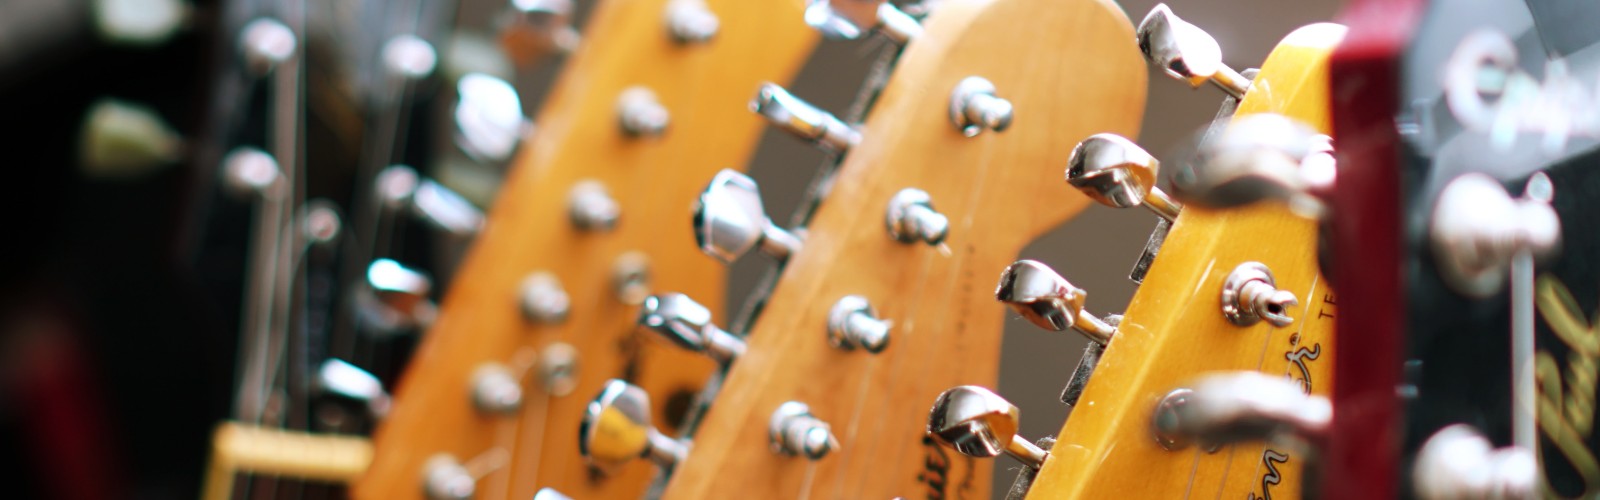 Image of the headstock and tuning pegs of several guitars